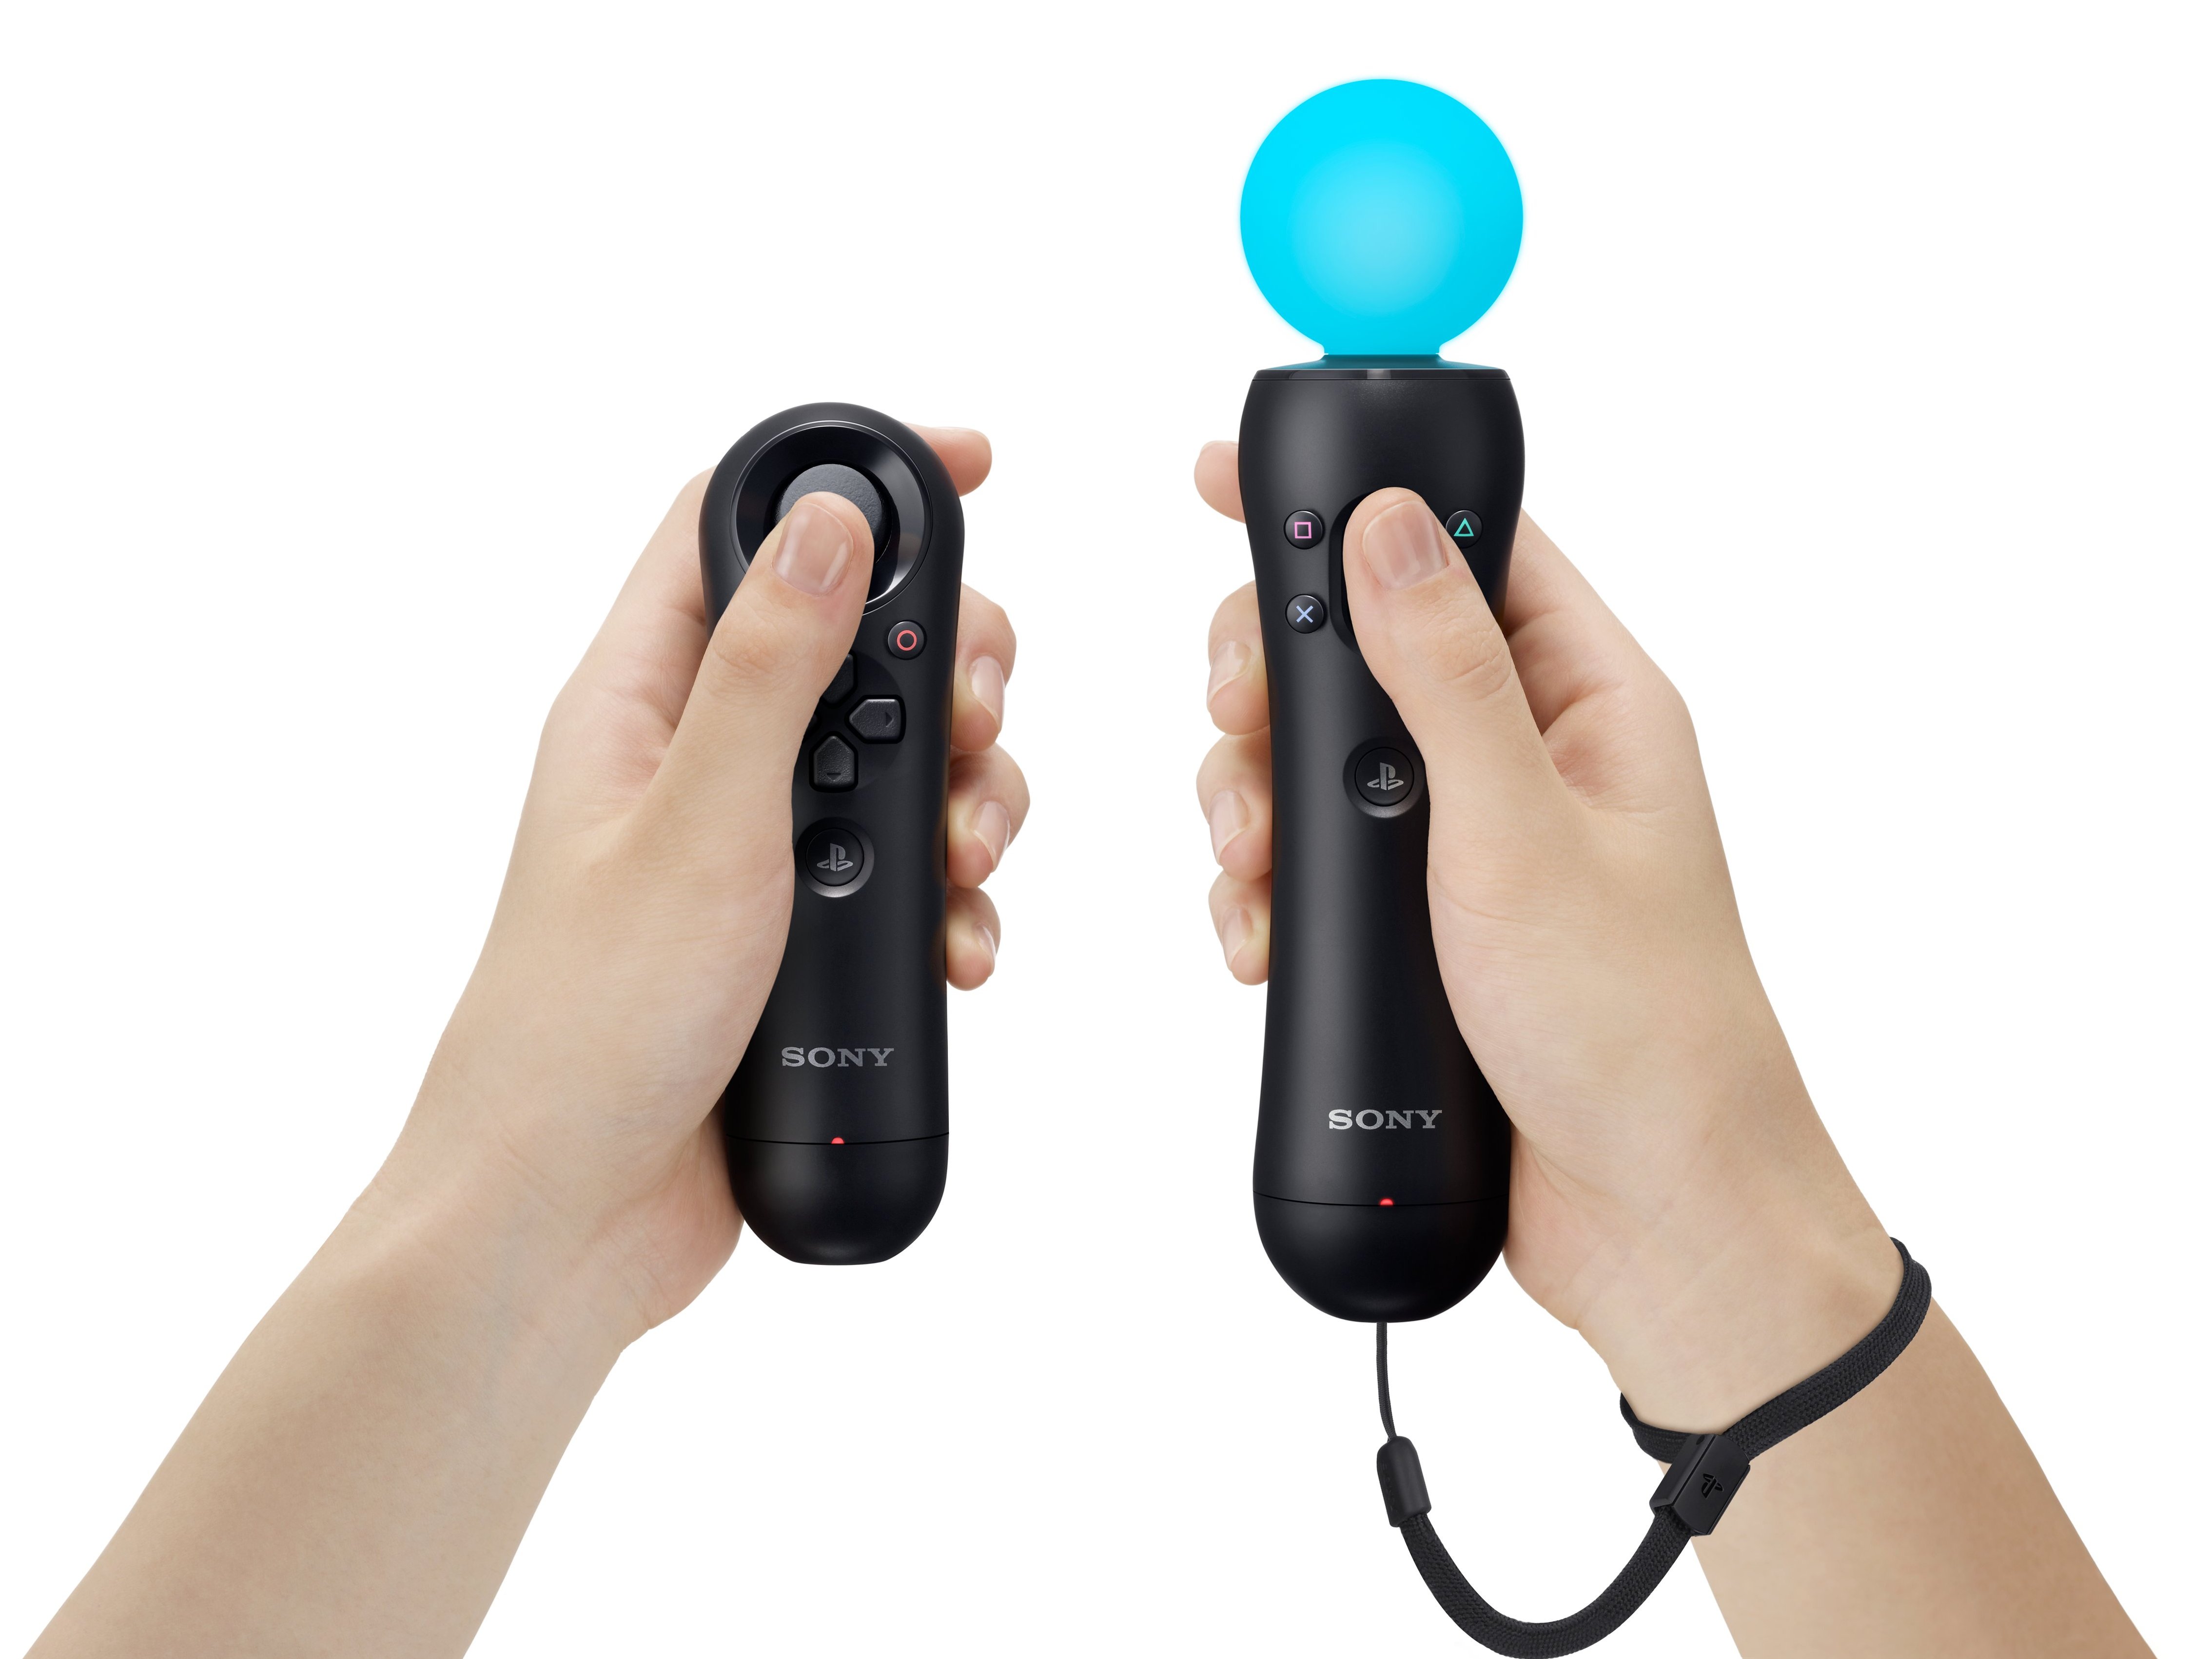 Стик соне. Sony ps4 move Motion Controller. Sony Motion Controller ps4. Контроллер Sony PLAYSTATION 3 move. Контроллеры PS move от Sony PS.